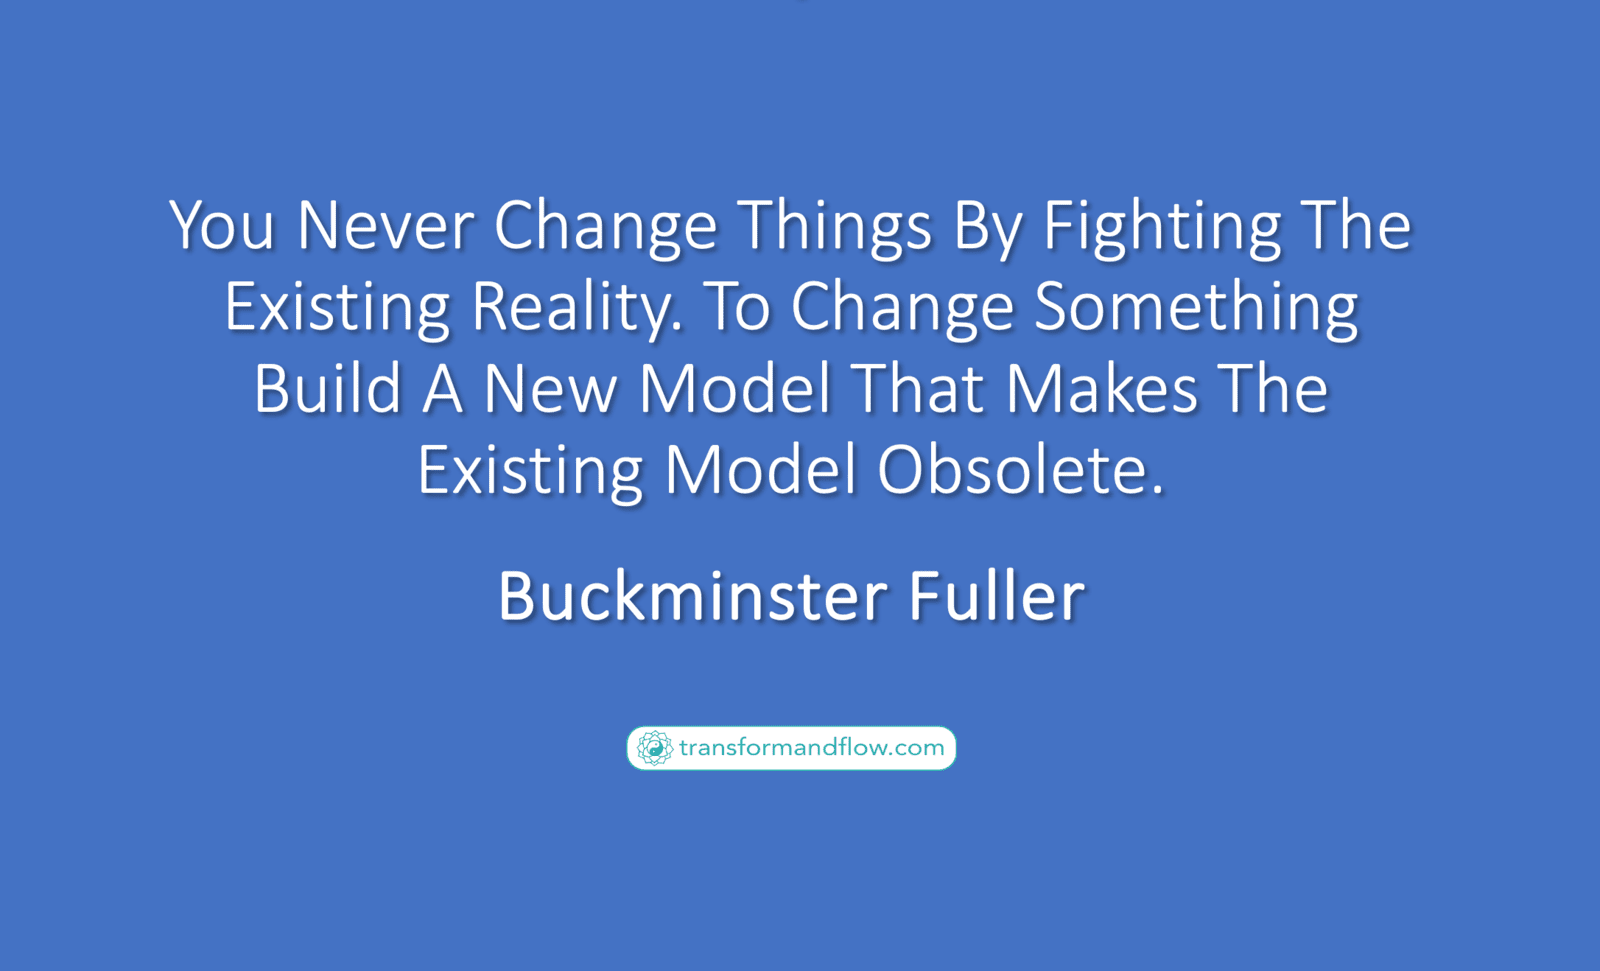 You Never Change Things By Fighting The Existing Reality. To Change Something Build A New Model That Makes The Existing Model Obsolete. Buckminster Fuller